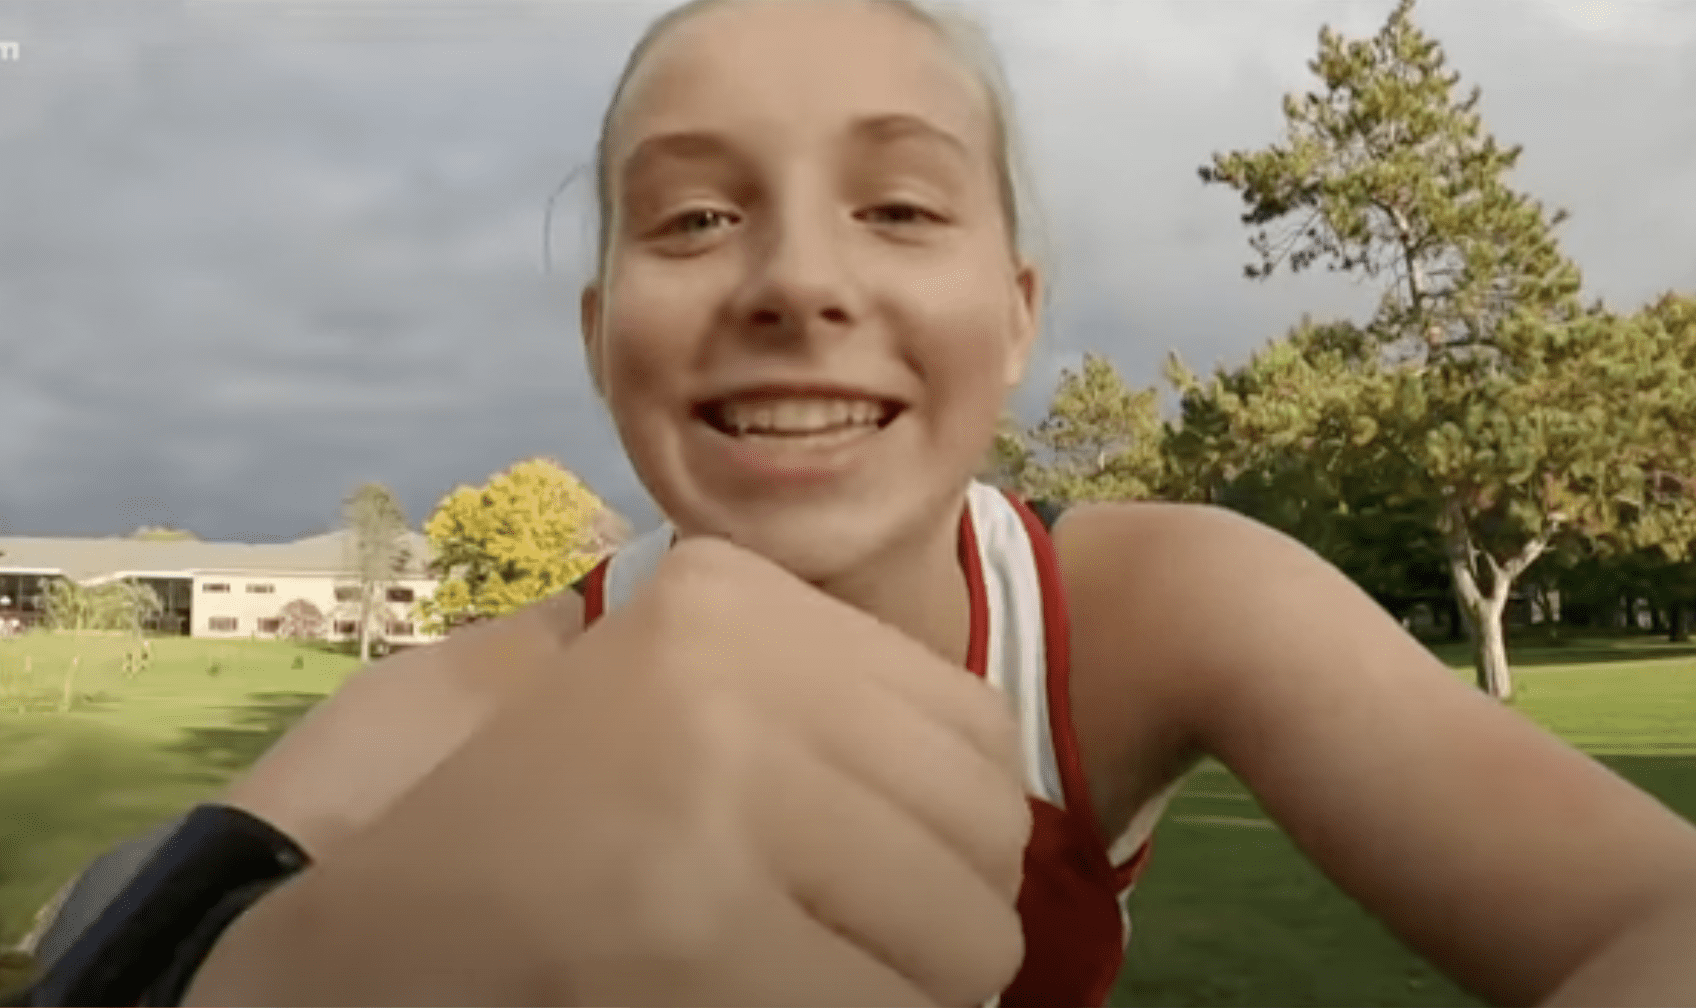 High school racer Susan who ran while pushing her disabled brother. | Photo: youtube.com/KARE 11 